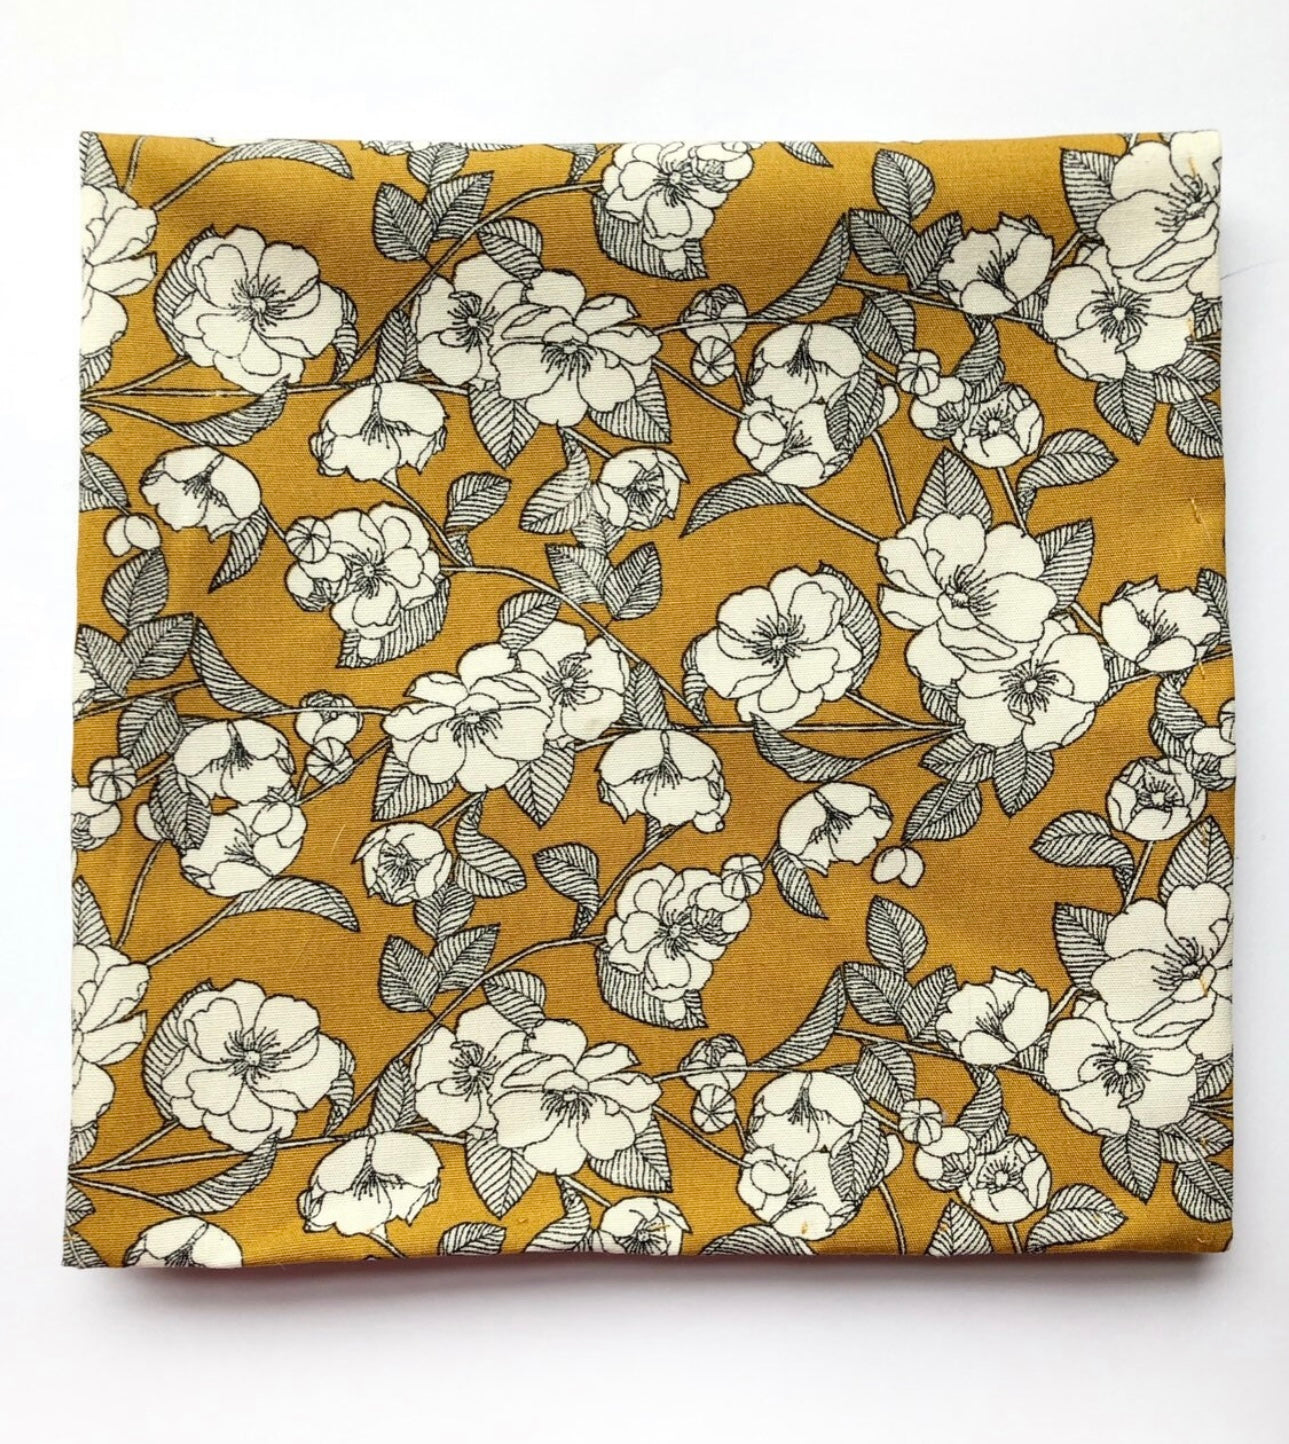 Pocket Squares in Mustard Yellow Floral